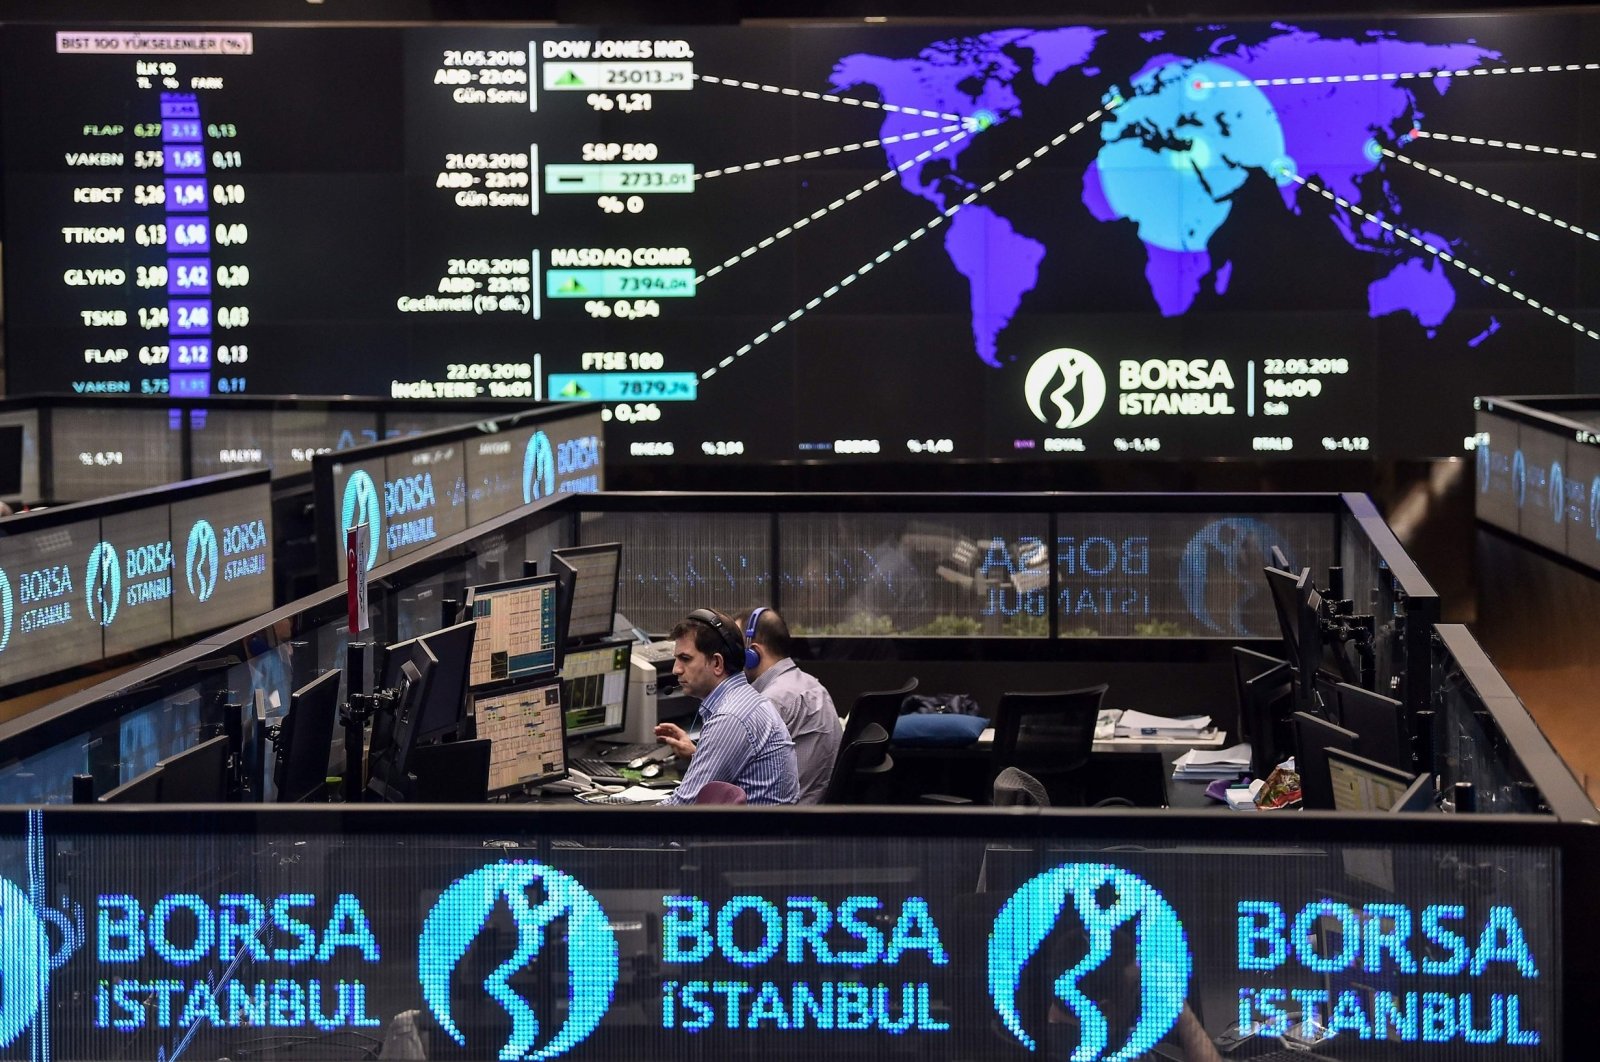 Traders work at their desks on the floor of the Borsa Istanbul stock exchange, Istanbul, Turkey, May 22, 2018. (AFP Photo)